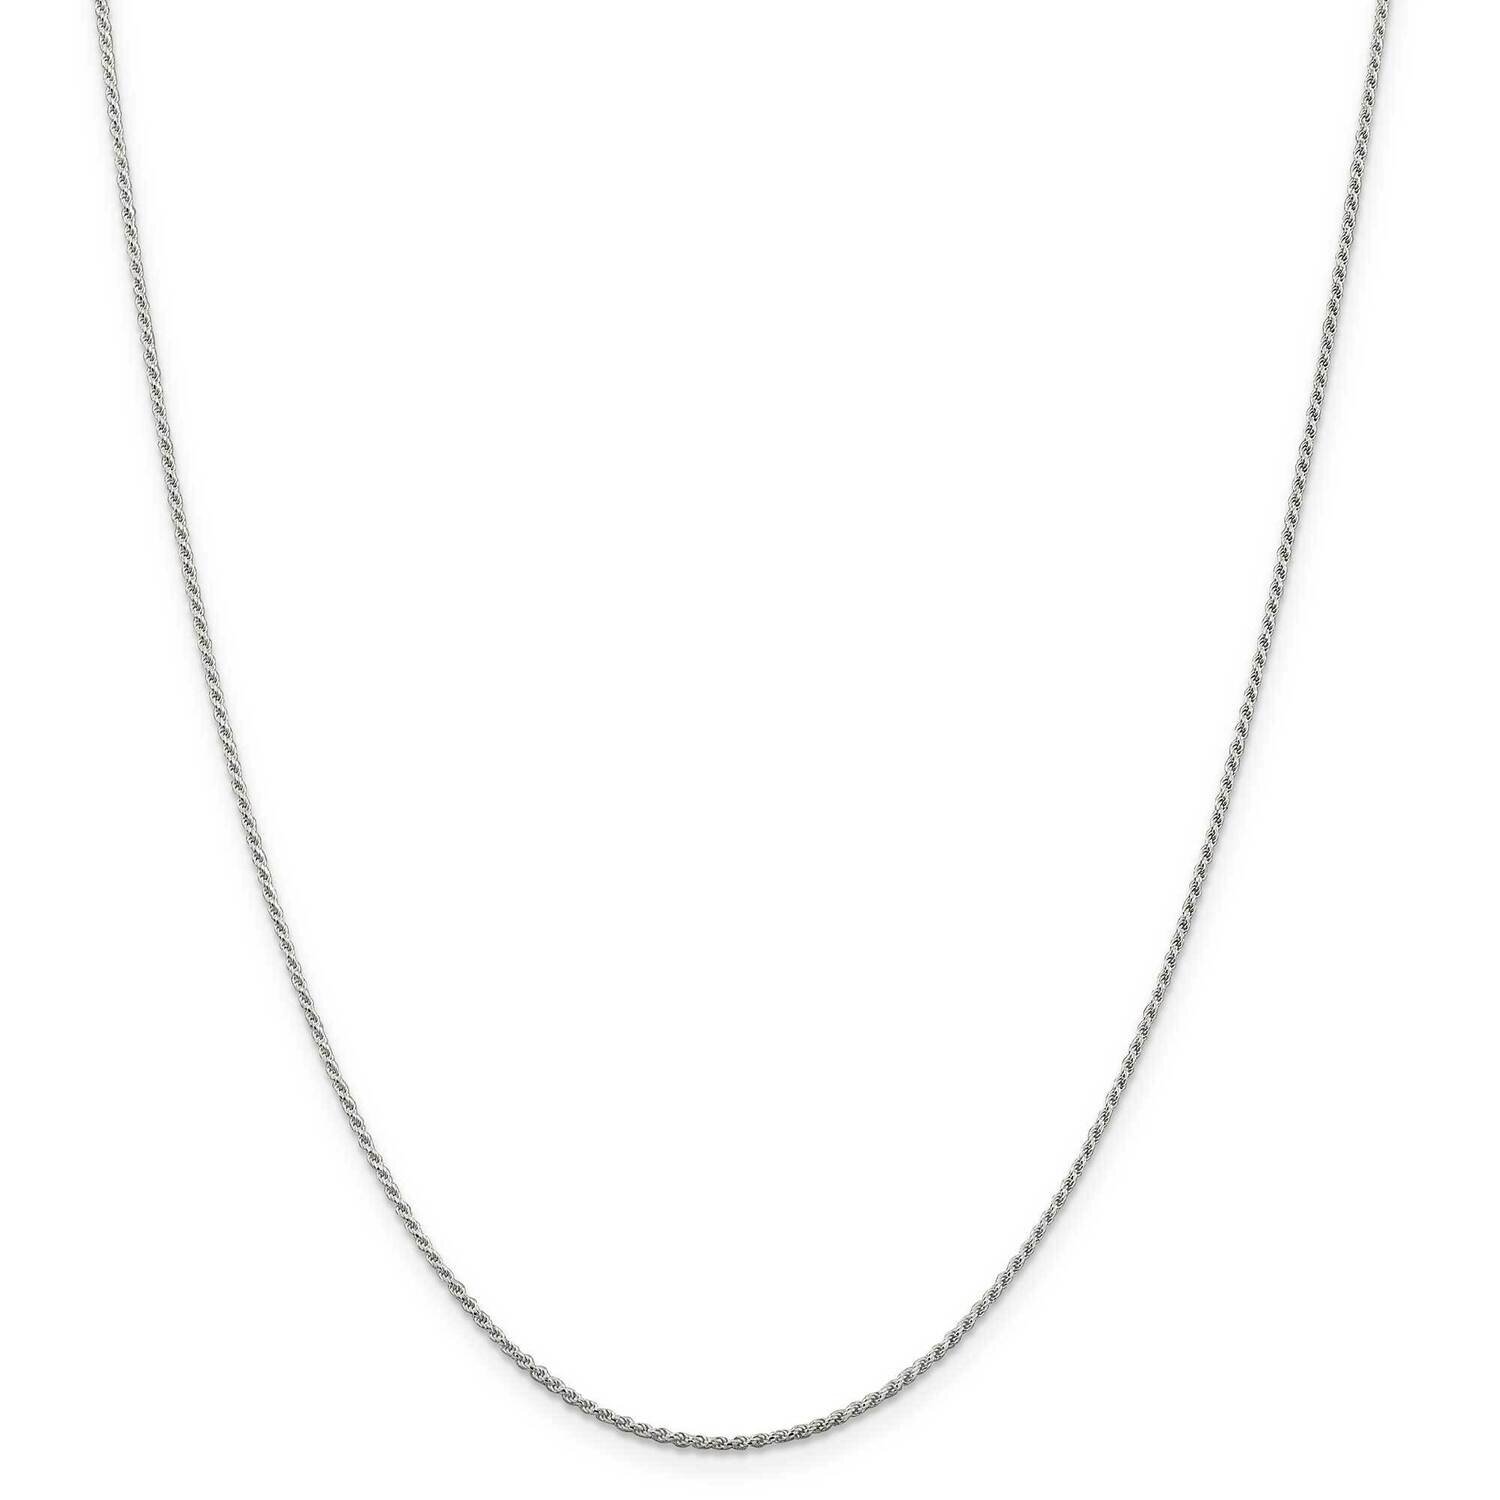 1.1mm Diamond-Cut Rope Chain with 2 Inch Extender 18 Inch Sterling Silver QDC015E-18